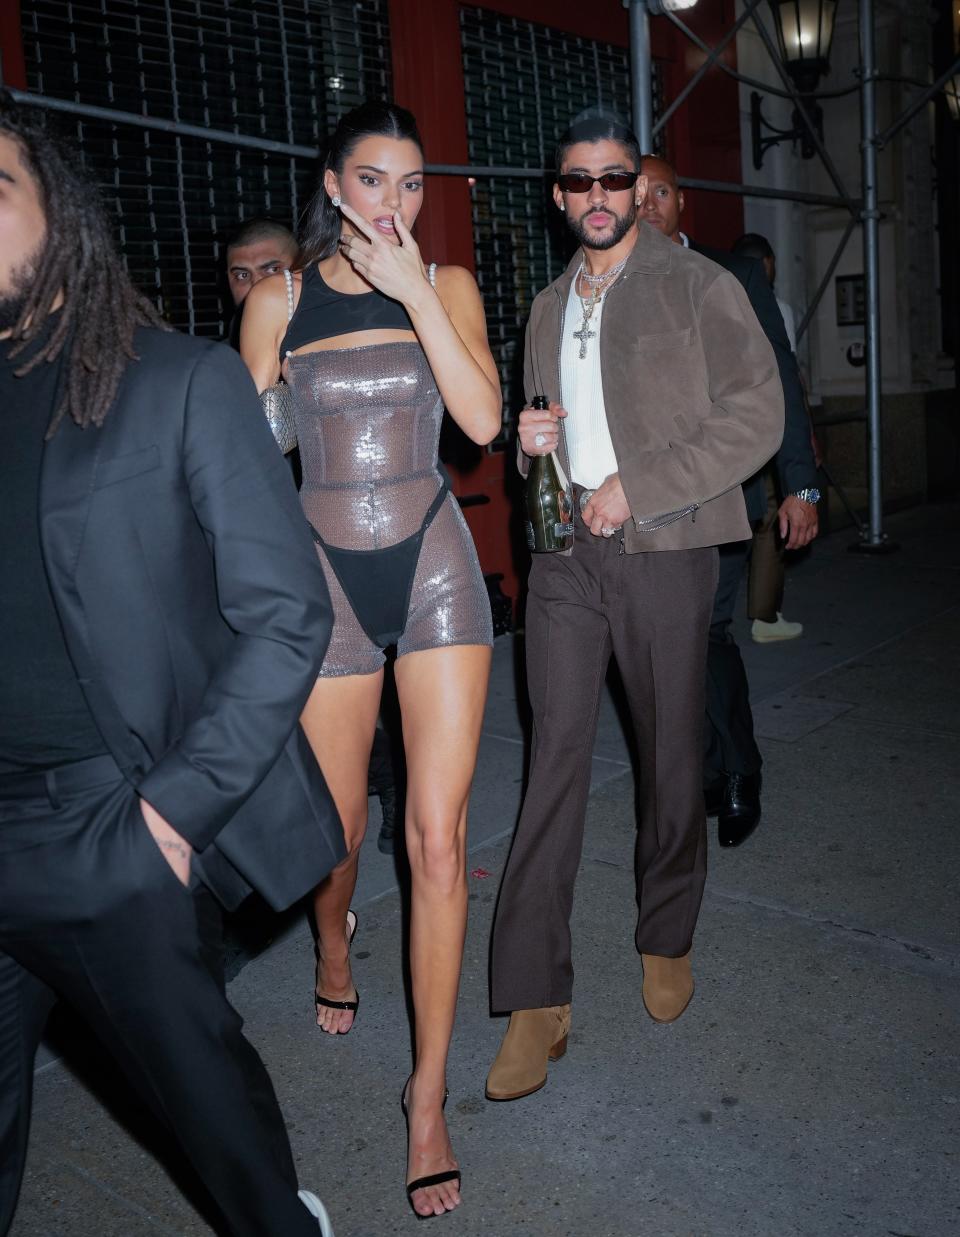 Jenner and Bad Bunny en route to a Met Gala afterparty on May 1, 2023